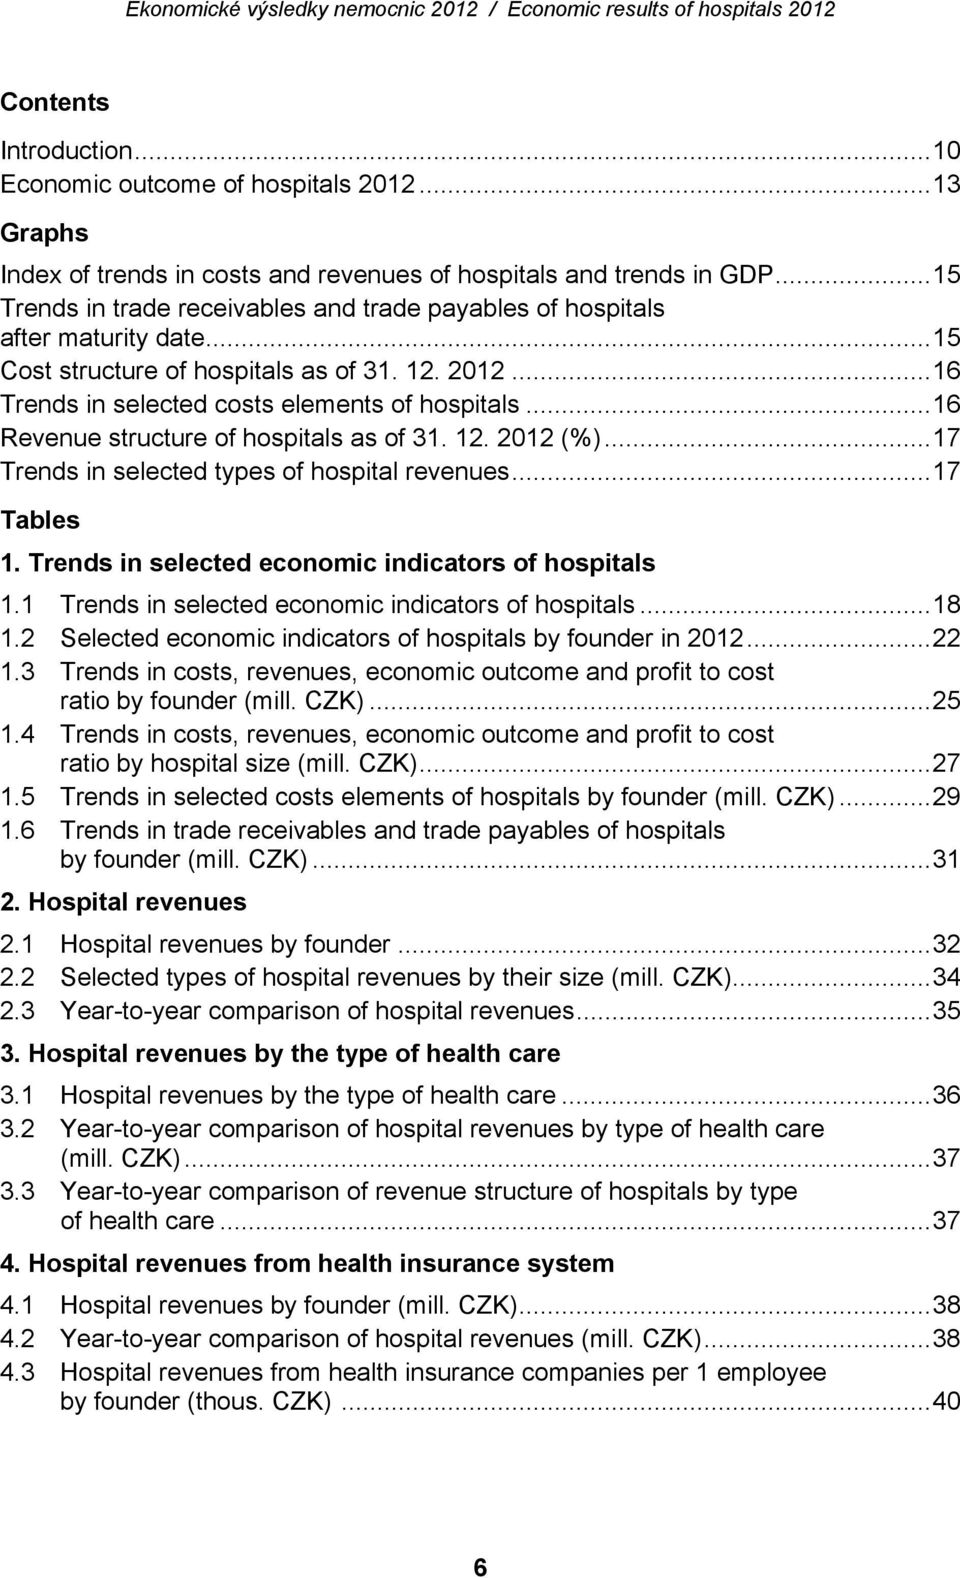 ..16 Revenue structure of hospitals as of 31. 12. 2012 (%)...17 Trends in selected types of hospital revenues...17 Tables 1. Trends in selected economic indicators of hospitals 1.